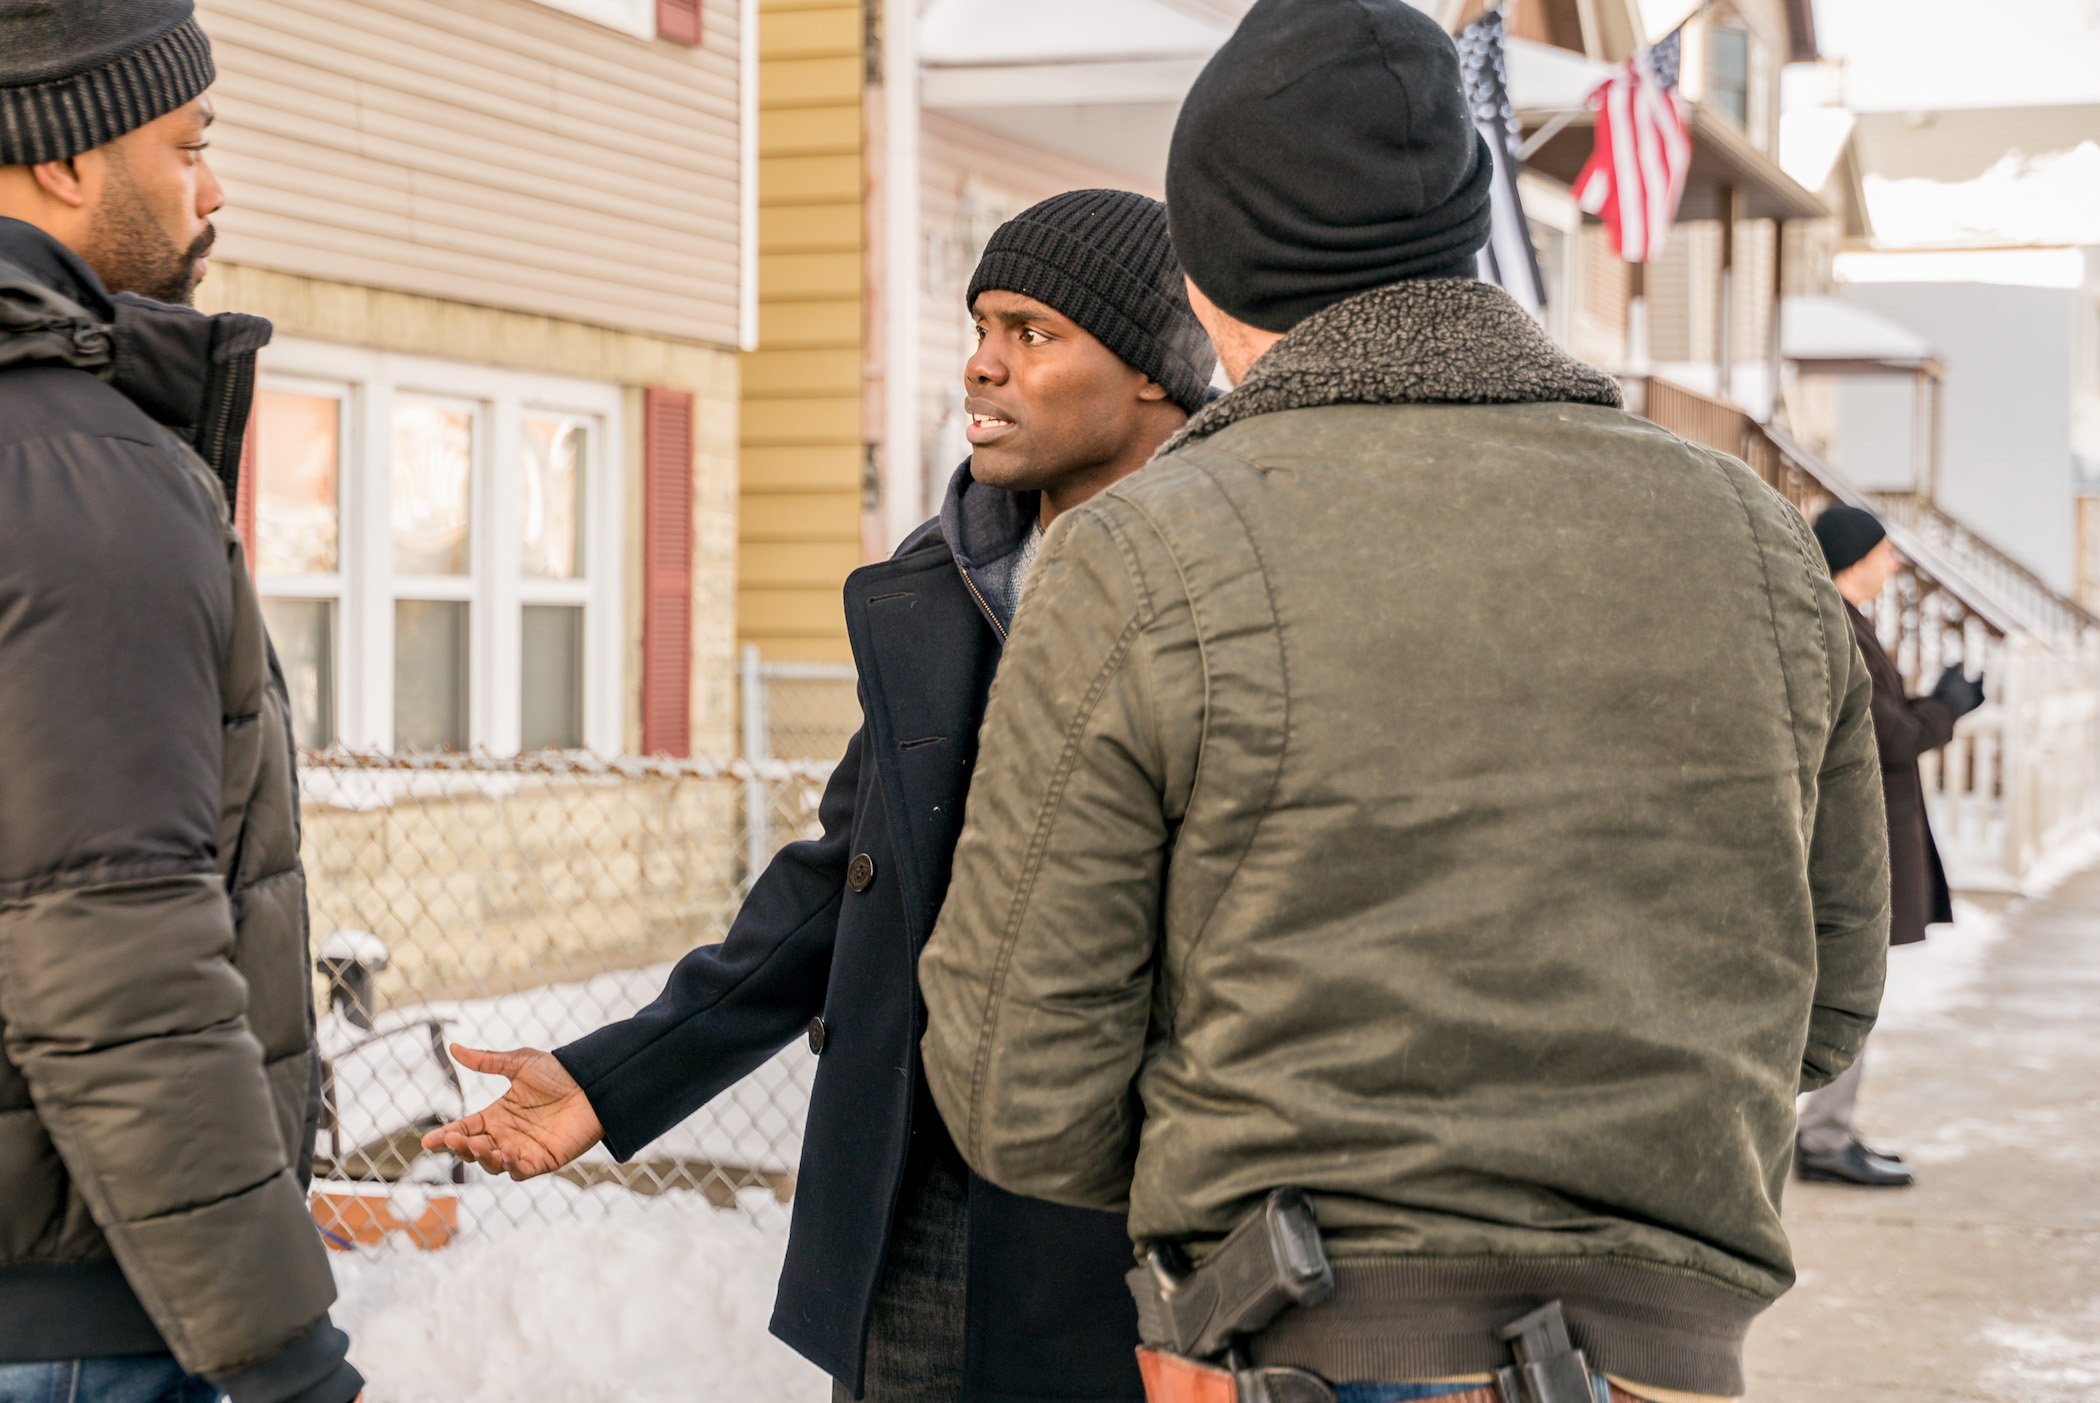 LaRoyce Hawkins as Kevin Atwater and Cleveland Berto as Andre Cooper, two 'Chicago P.D.' cast members in season 8 talking to each other outside during the winter. Fans want to know if Berto will rejoin the cast in 'Chicago P.D.' Season 9